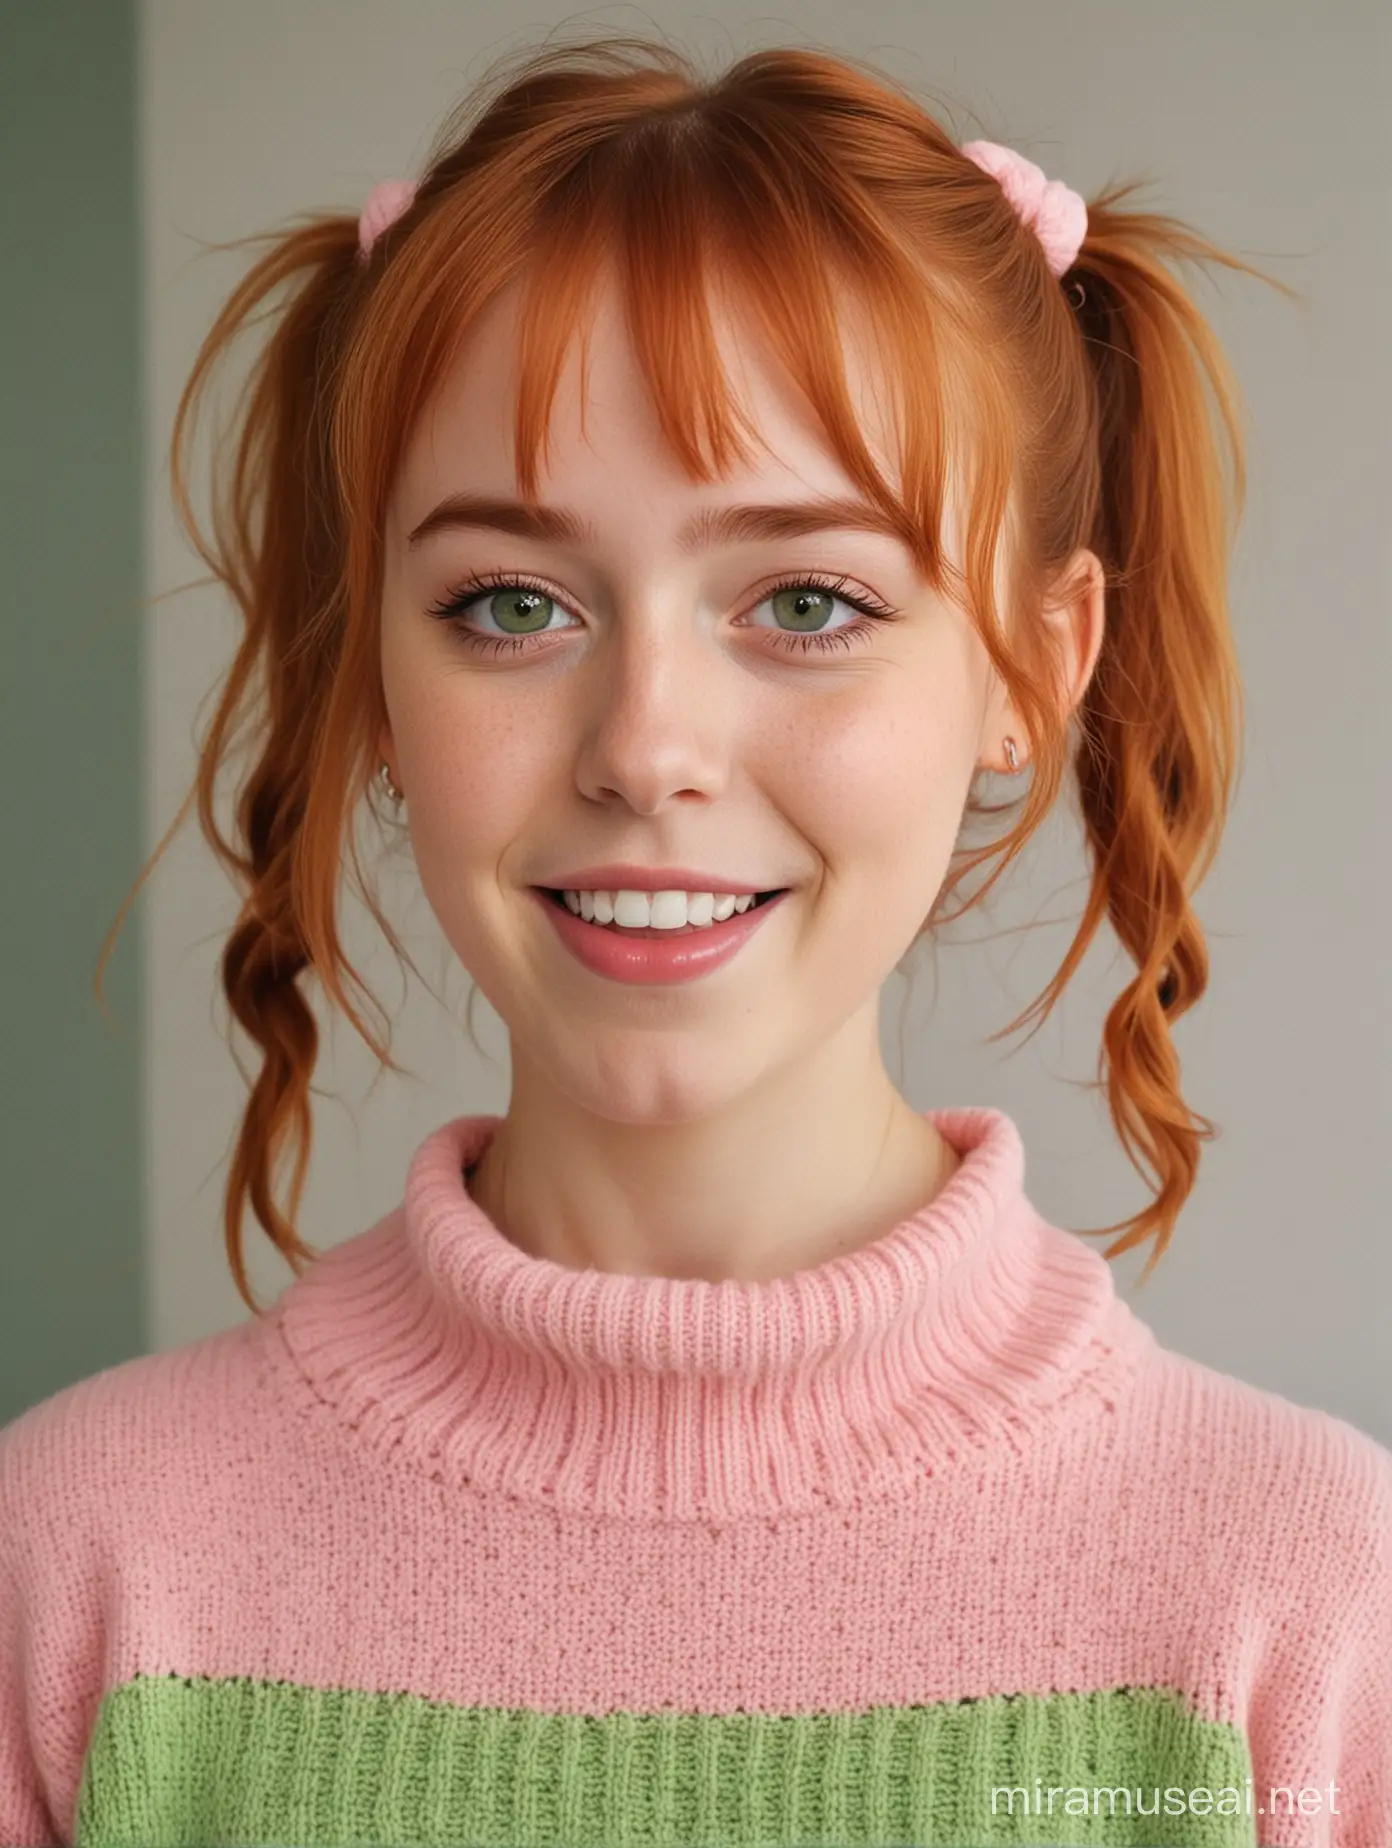 Adorable GingerHaired Child in Pink Chunky Sweater Dress Smiling